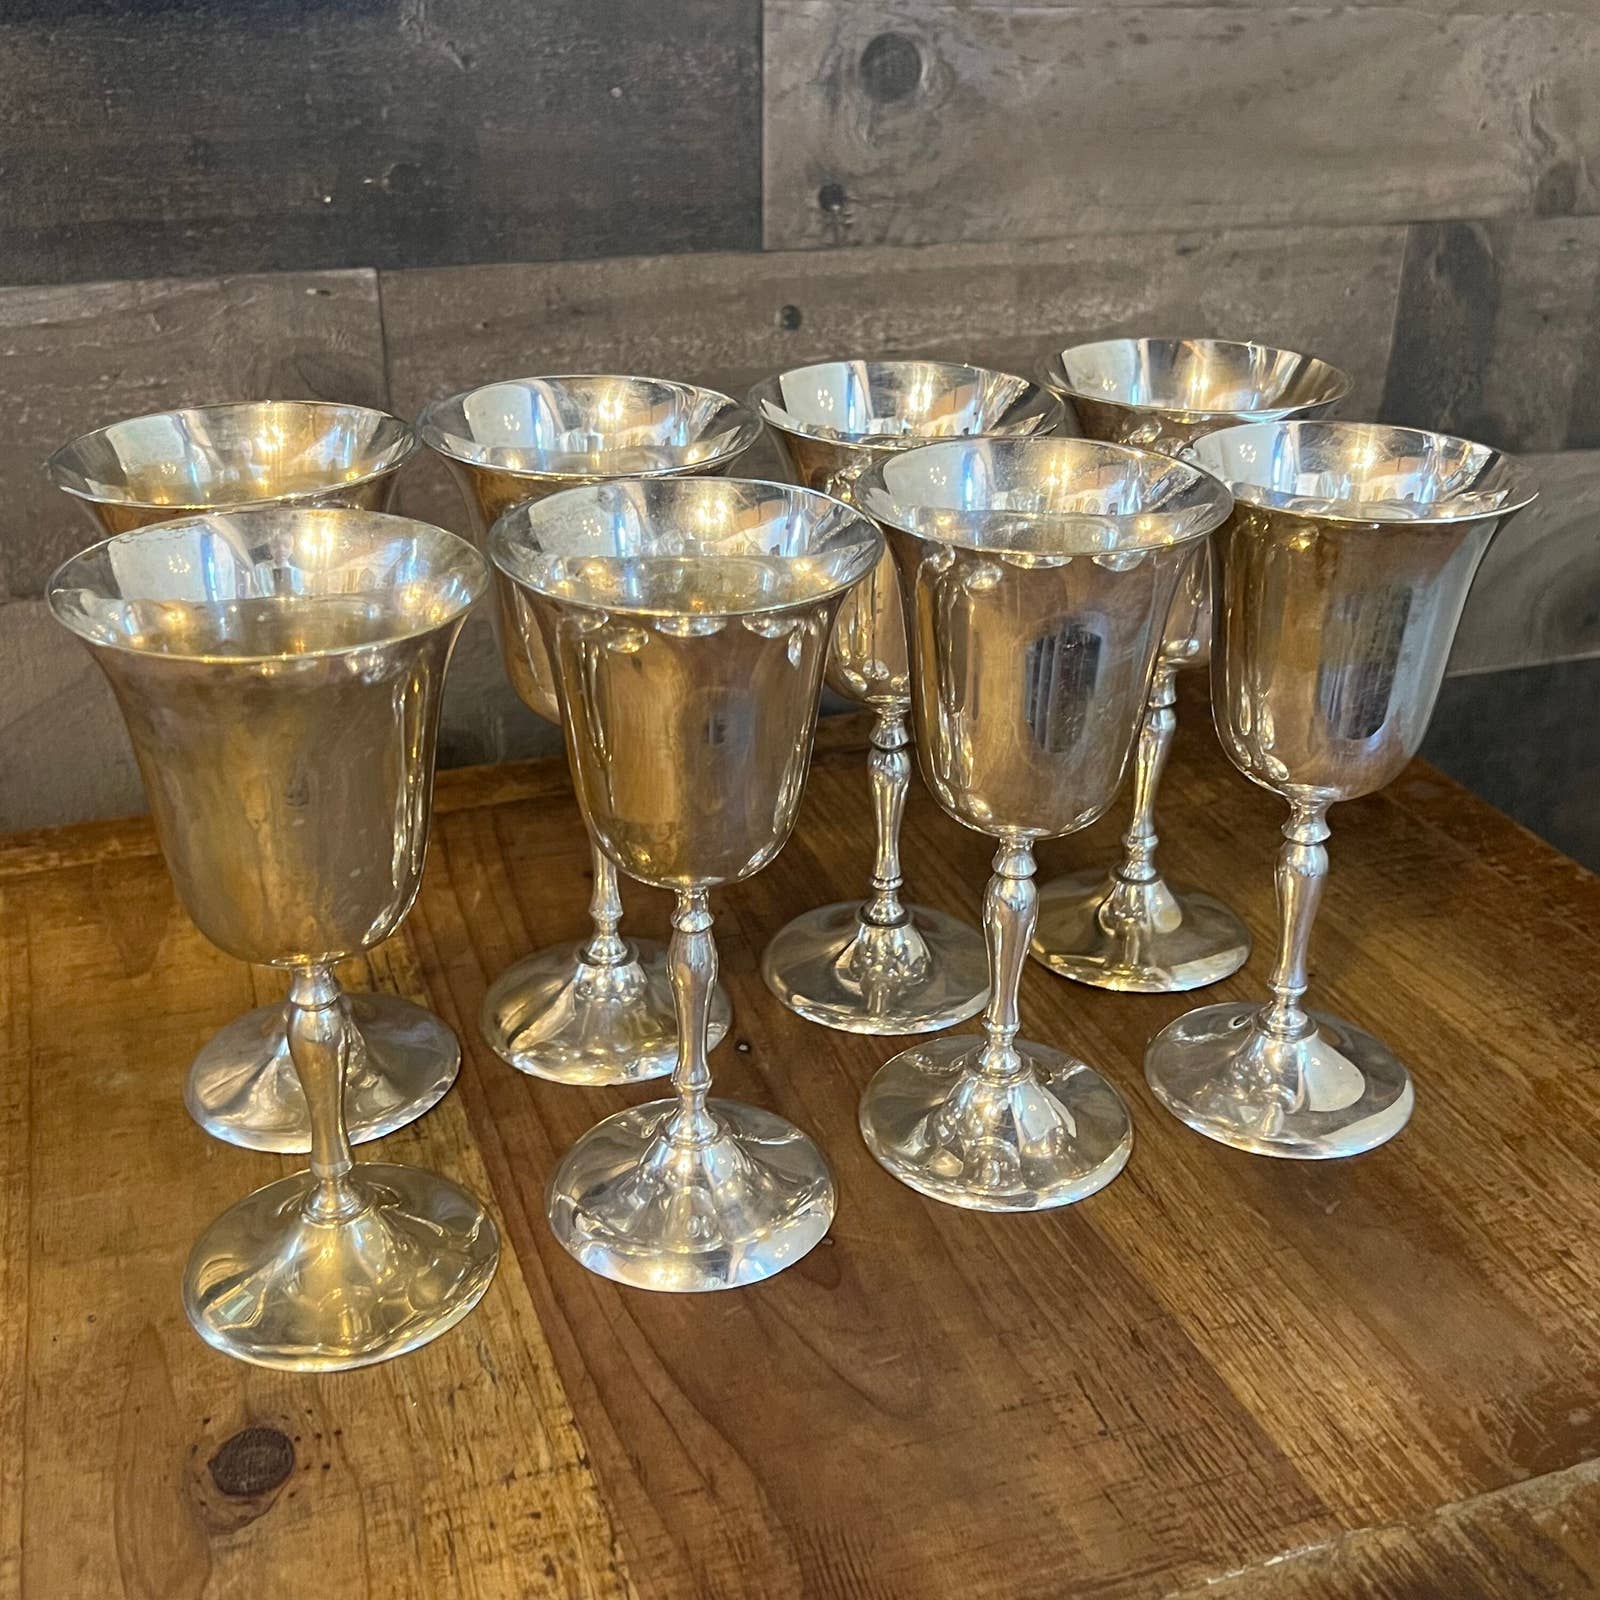 2 Vintage Leonard Silver Plate Wine Goblets Cups Fluted With Stem Pedestal  Italy - Wine & Champagne Glasses - Redding, California, Facebook  Marketplace